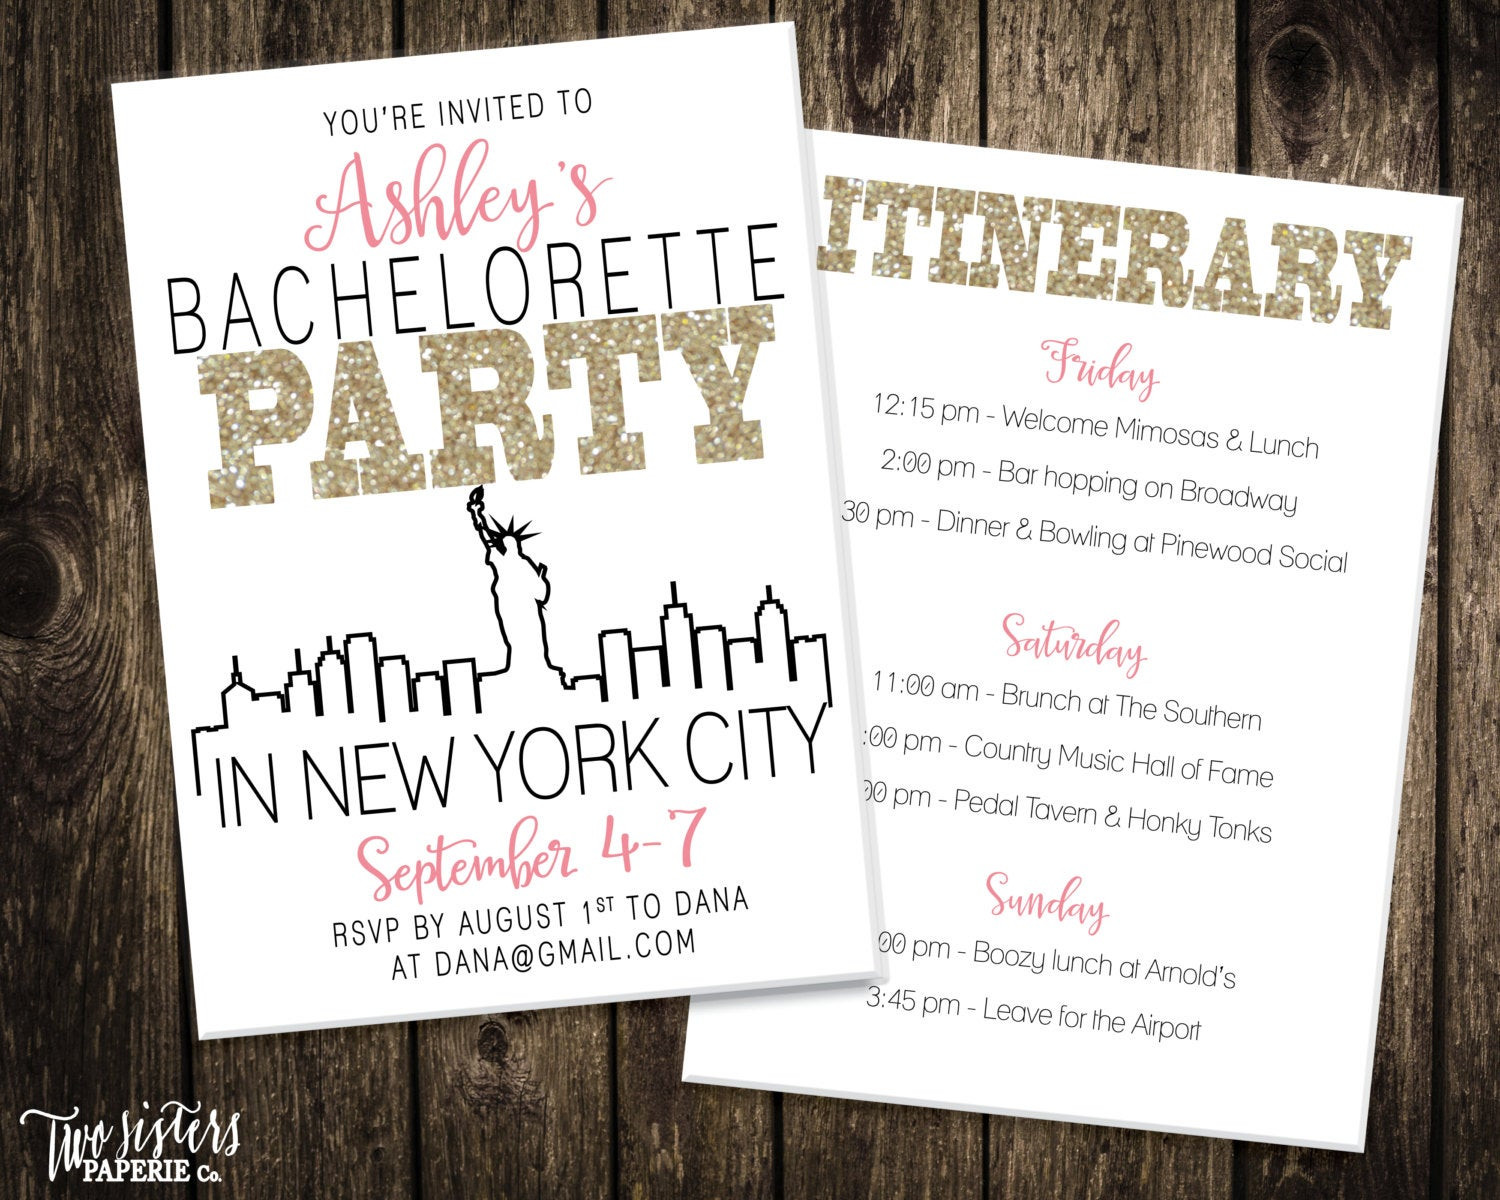 Bachelorette Party Ideas In Nyc
 New York City Bachelorette Party Invitation & Itinerary NEW